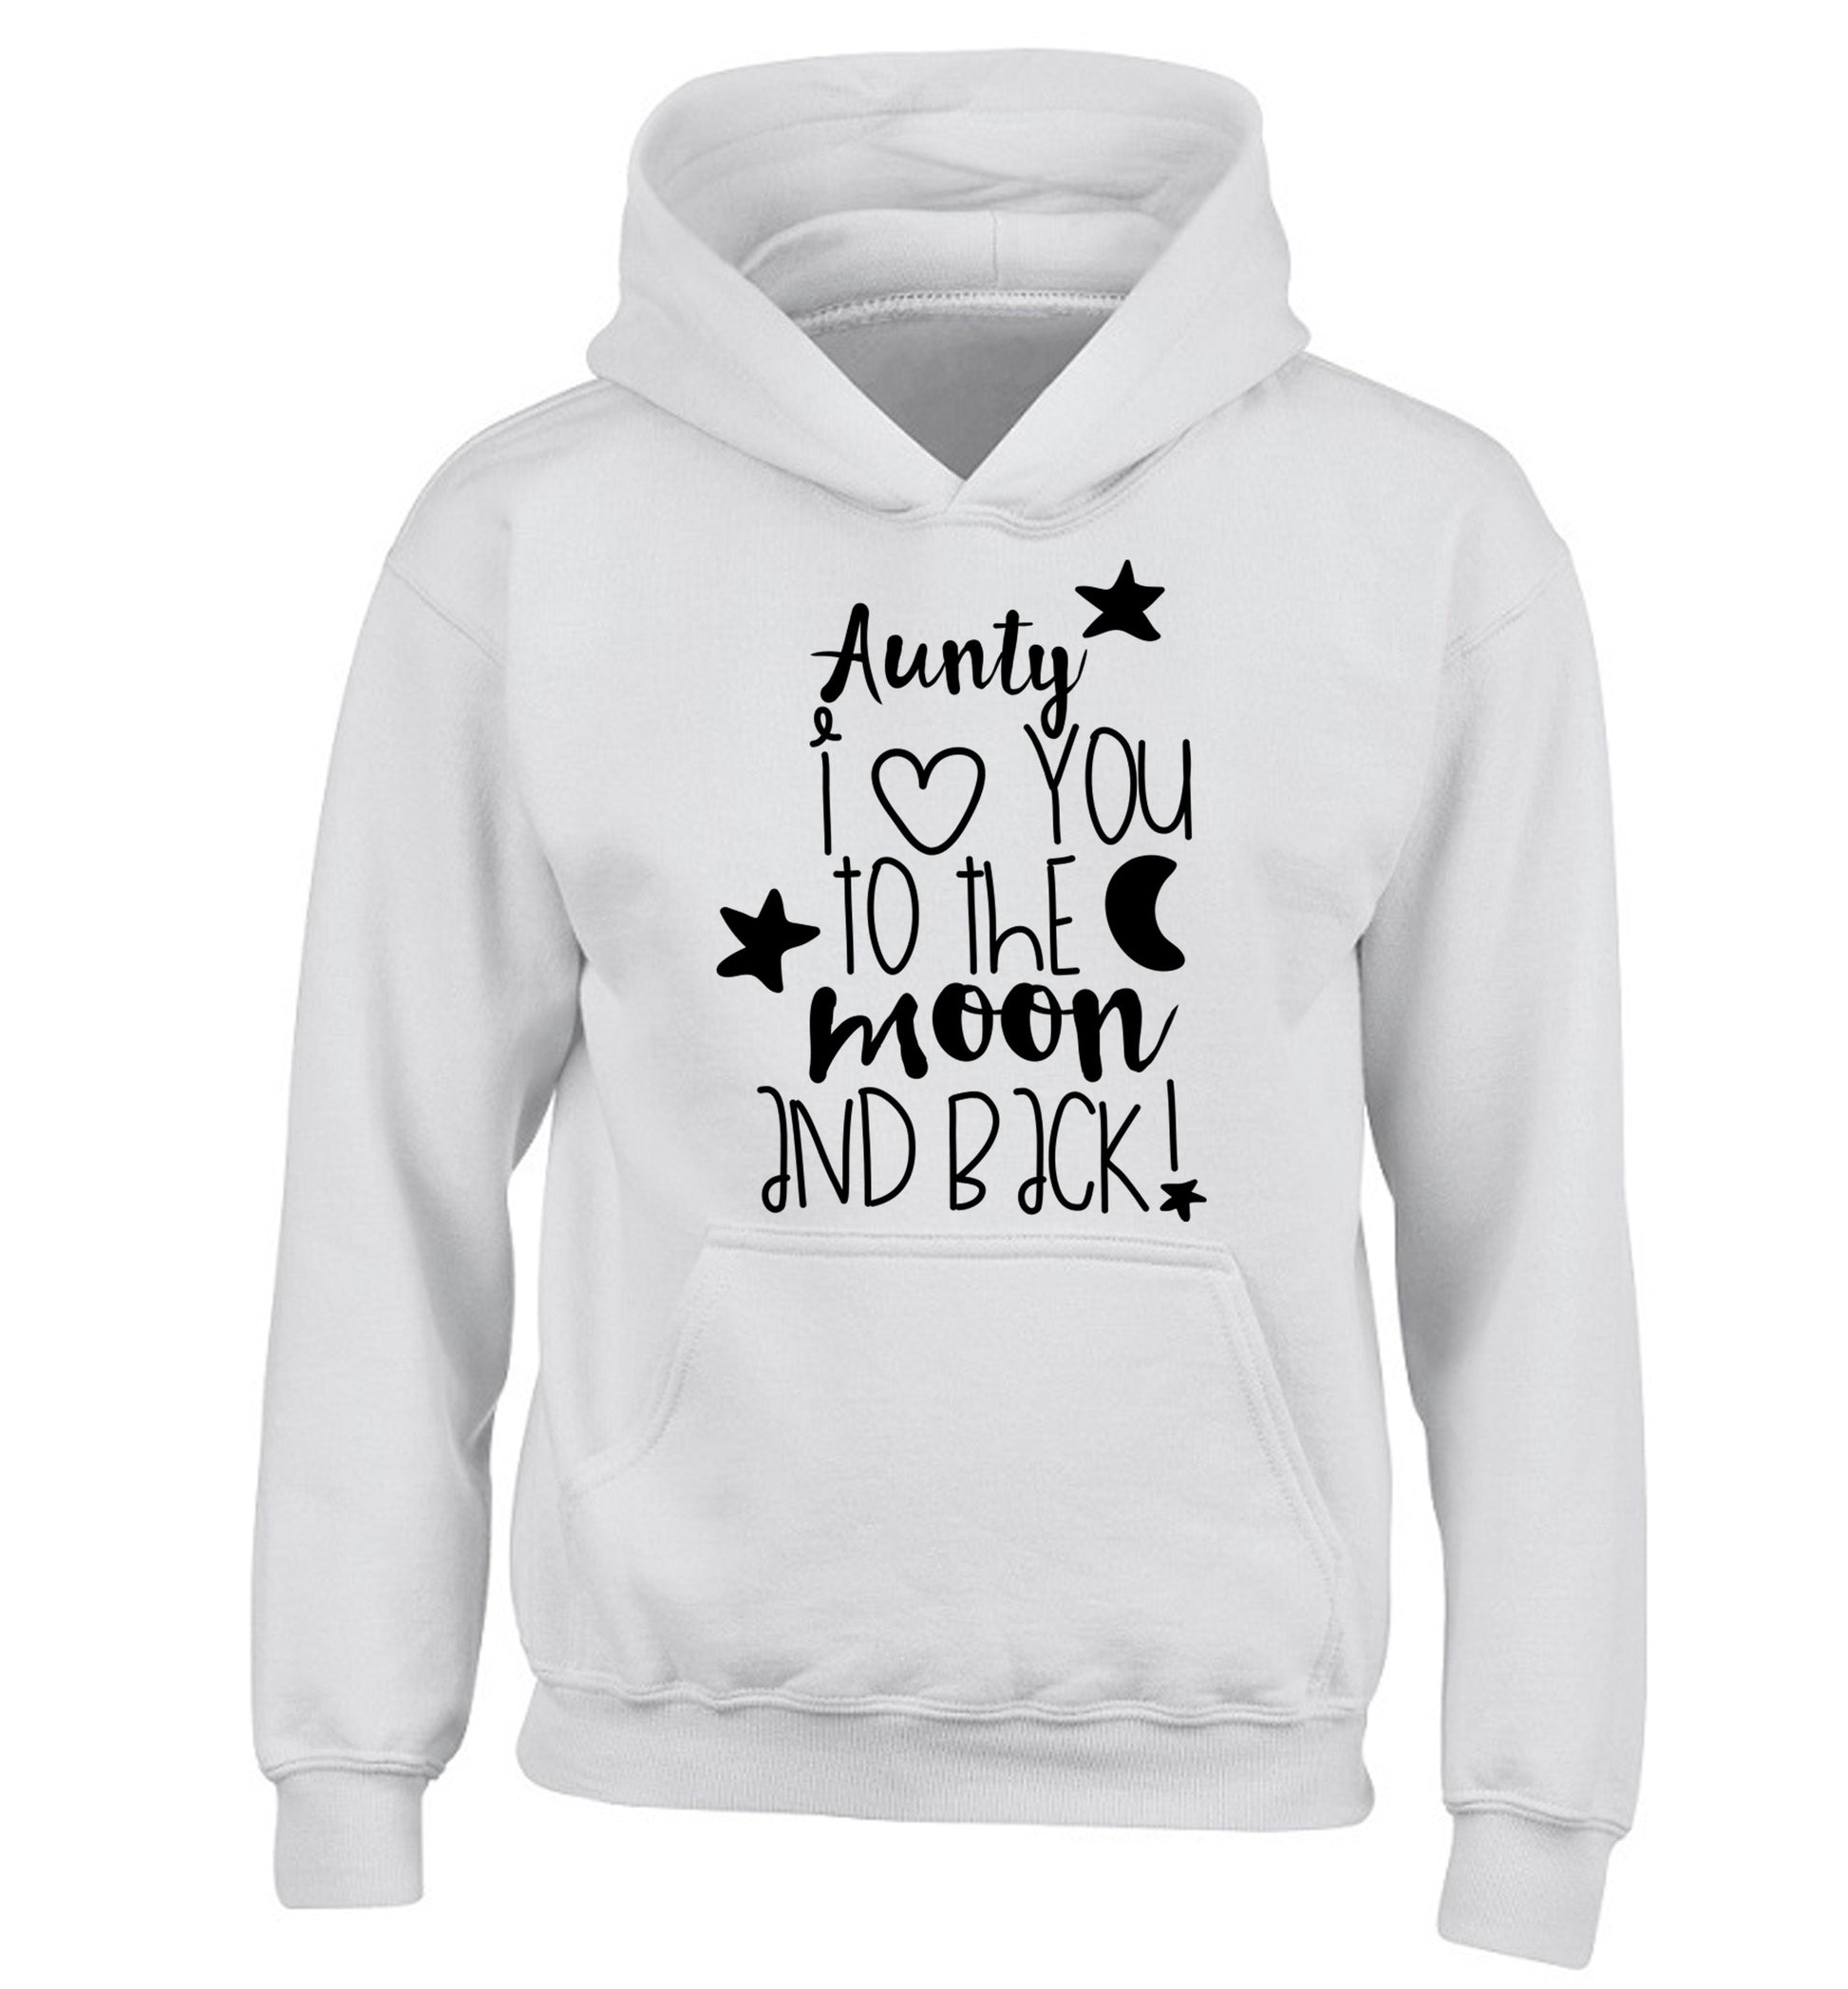 Aunty I love you to the moon and back children's white hoodie 12-14 Years